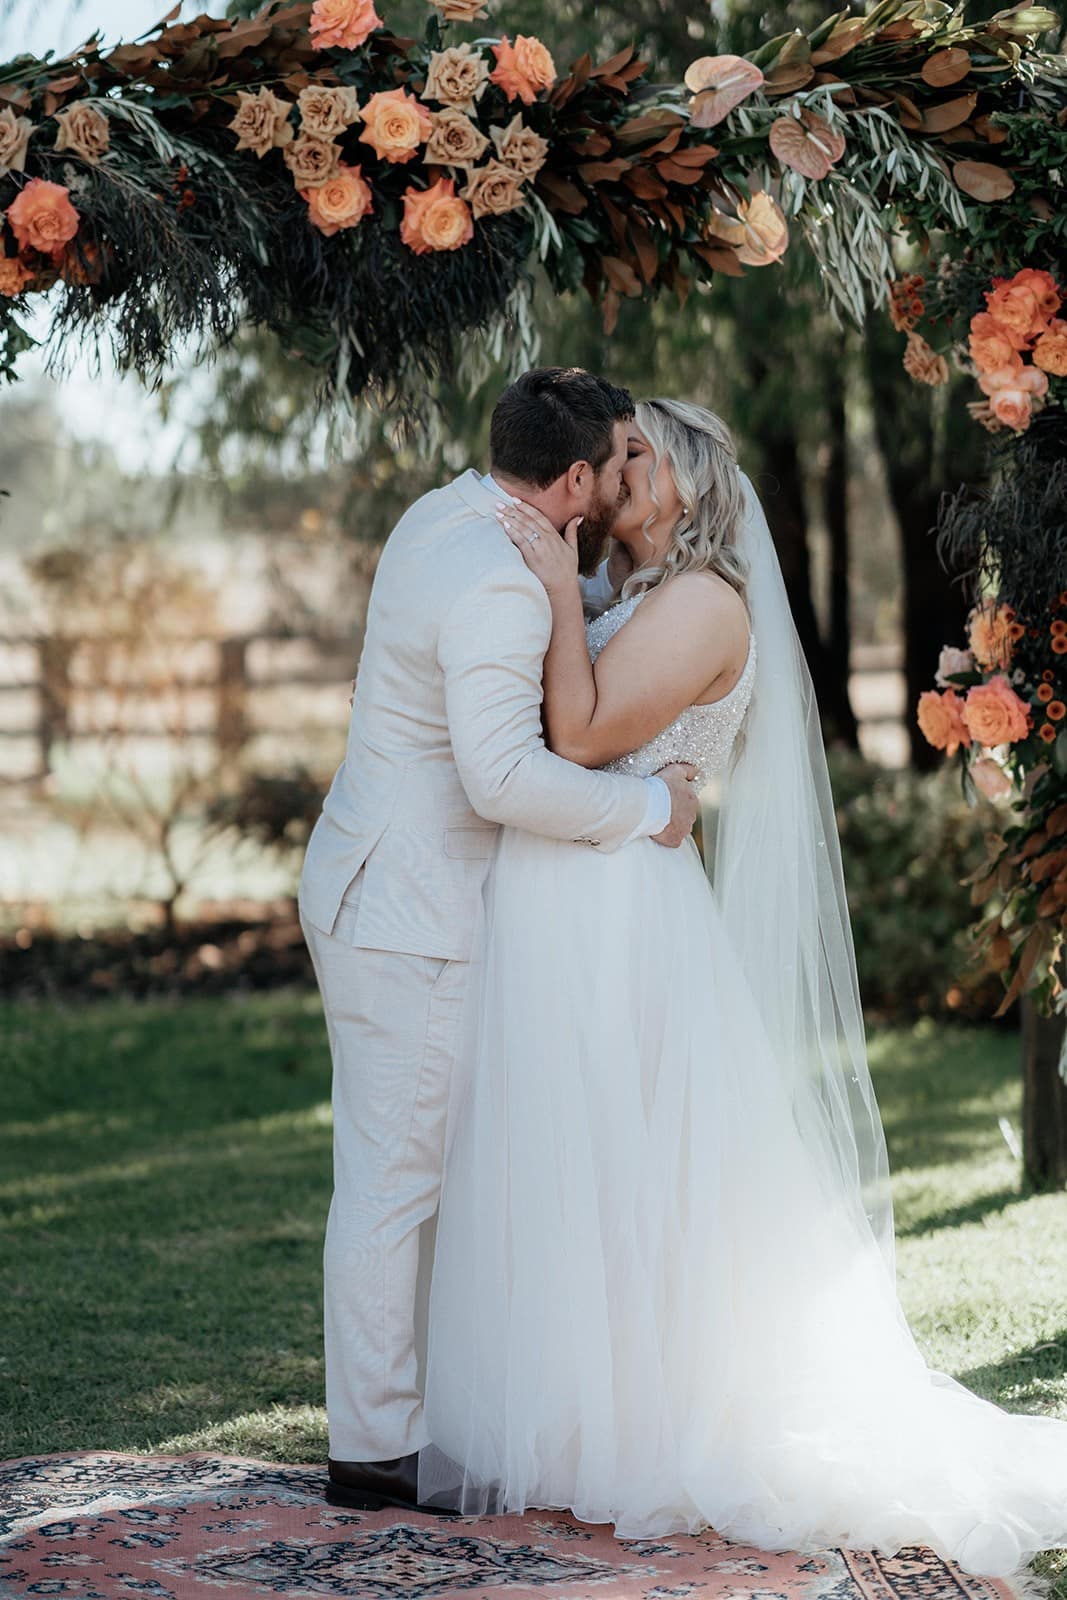 Hayley & Rory's boho inspired country wedding south of Perth